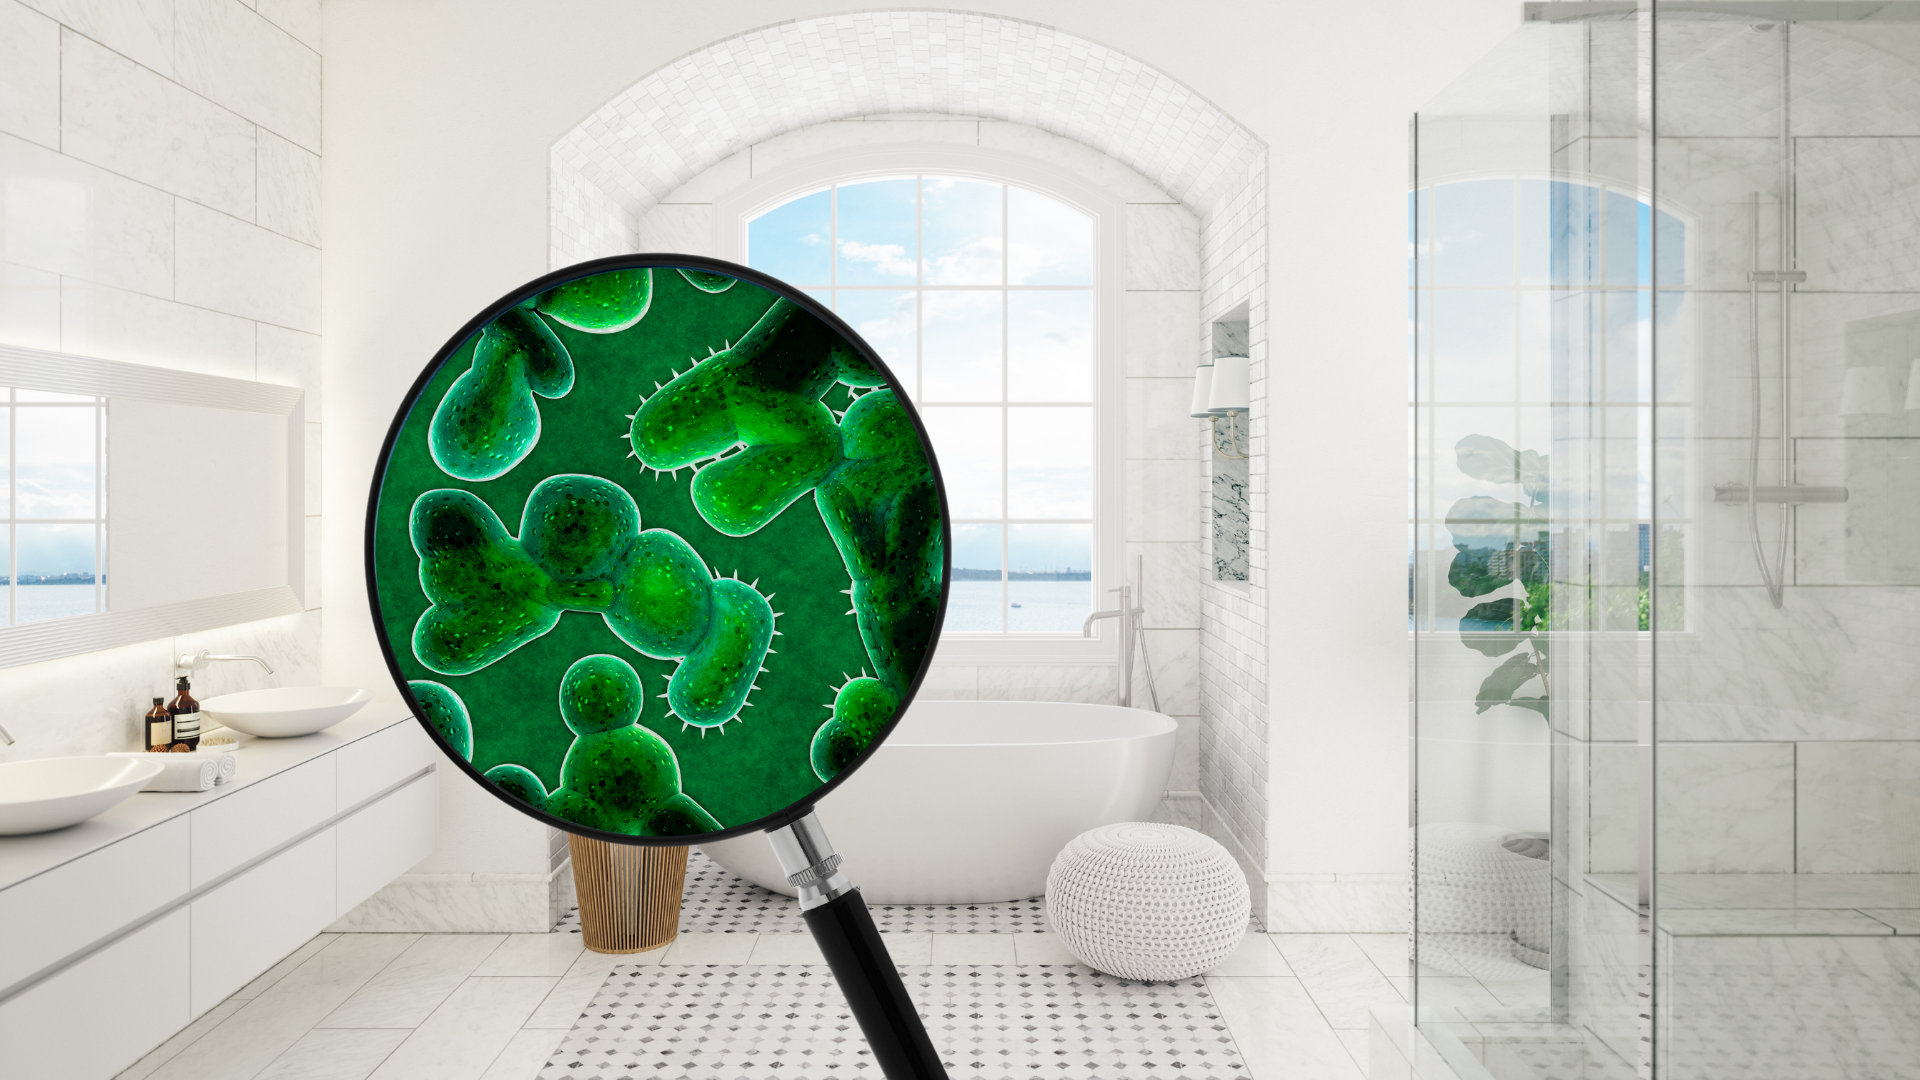 Germ Alert! What Germs Could Be Lurking In Your Bathroom?